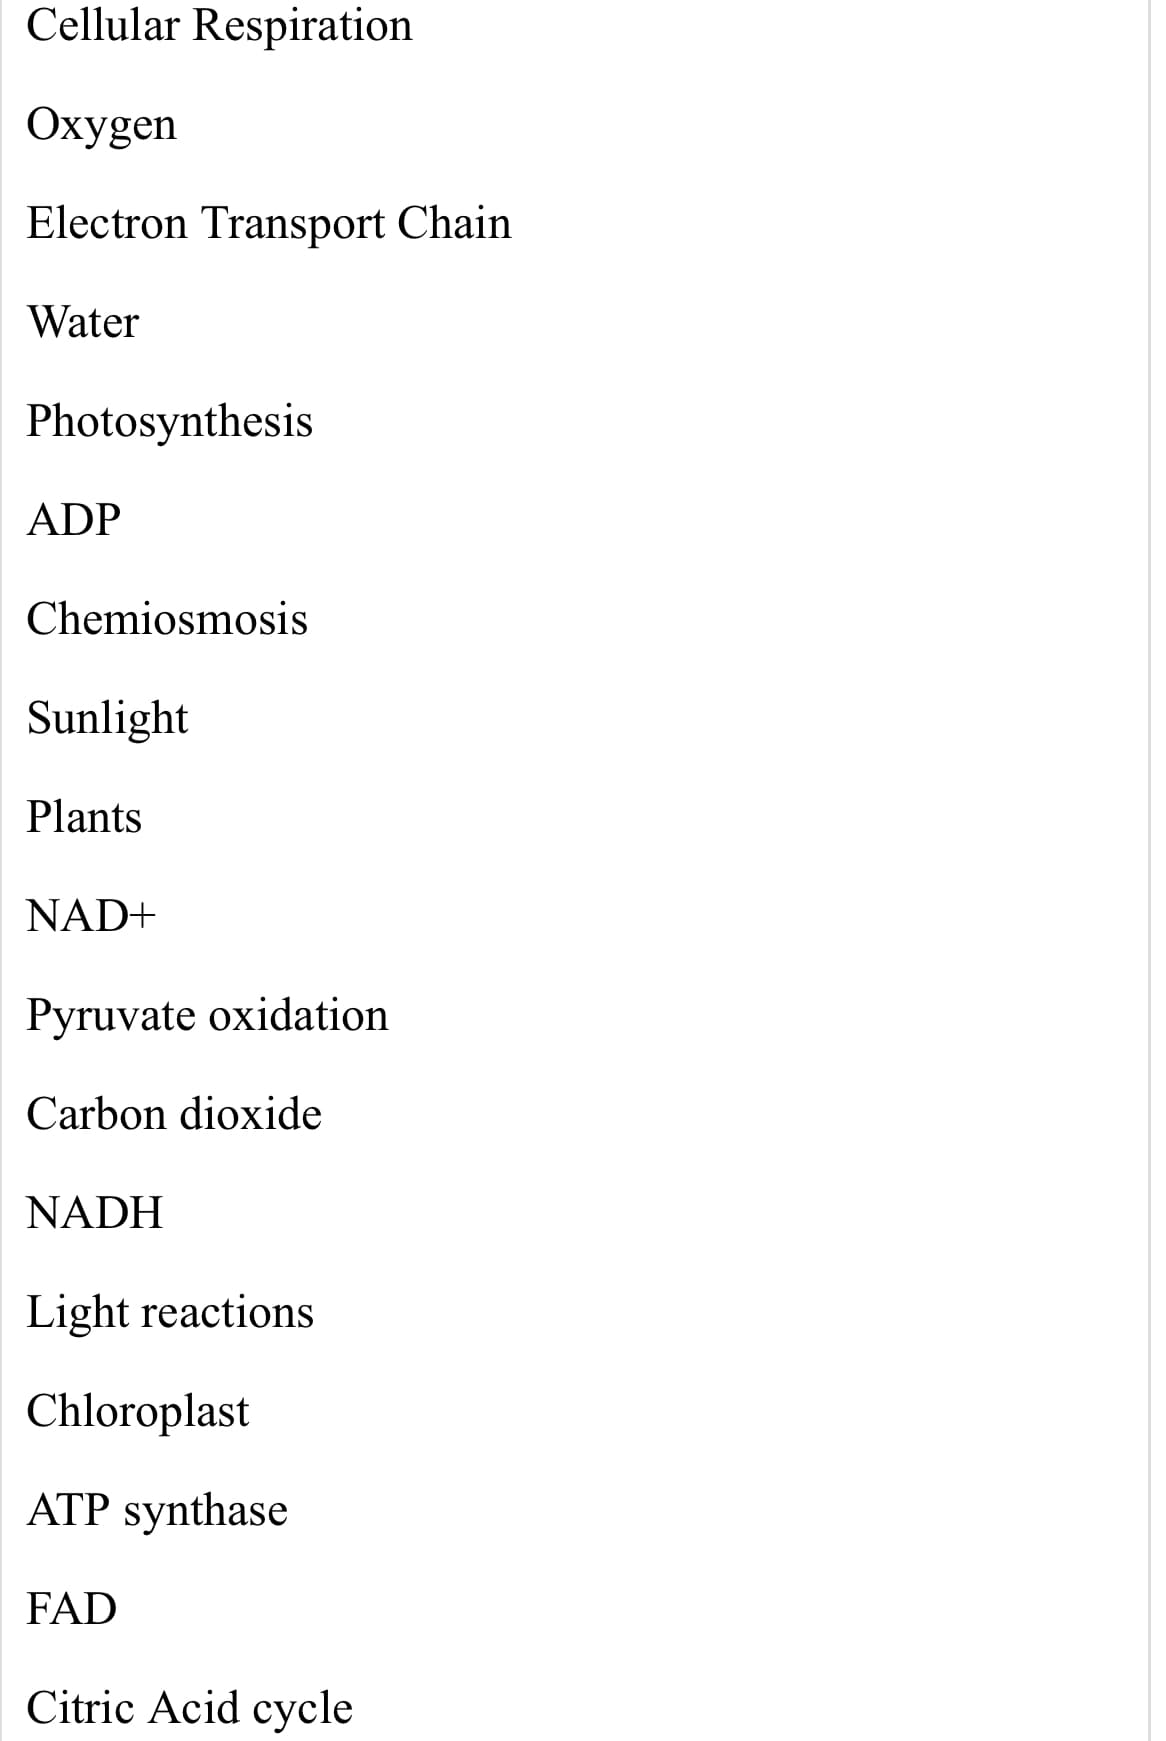 Cellular Respiration
Oxygen
Electron Transport Chain
Water
Photosynthesis
ADP
Chemiosmosis
Sunlight
Plants
NAD+
Pyruvate oxidation
Carbon dioxide
NADH
Light reactions
Chloroplast
ATP synthase
FAD
Citric Acid cycle